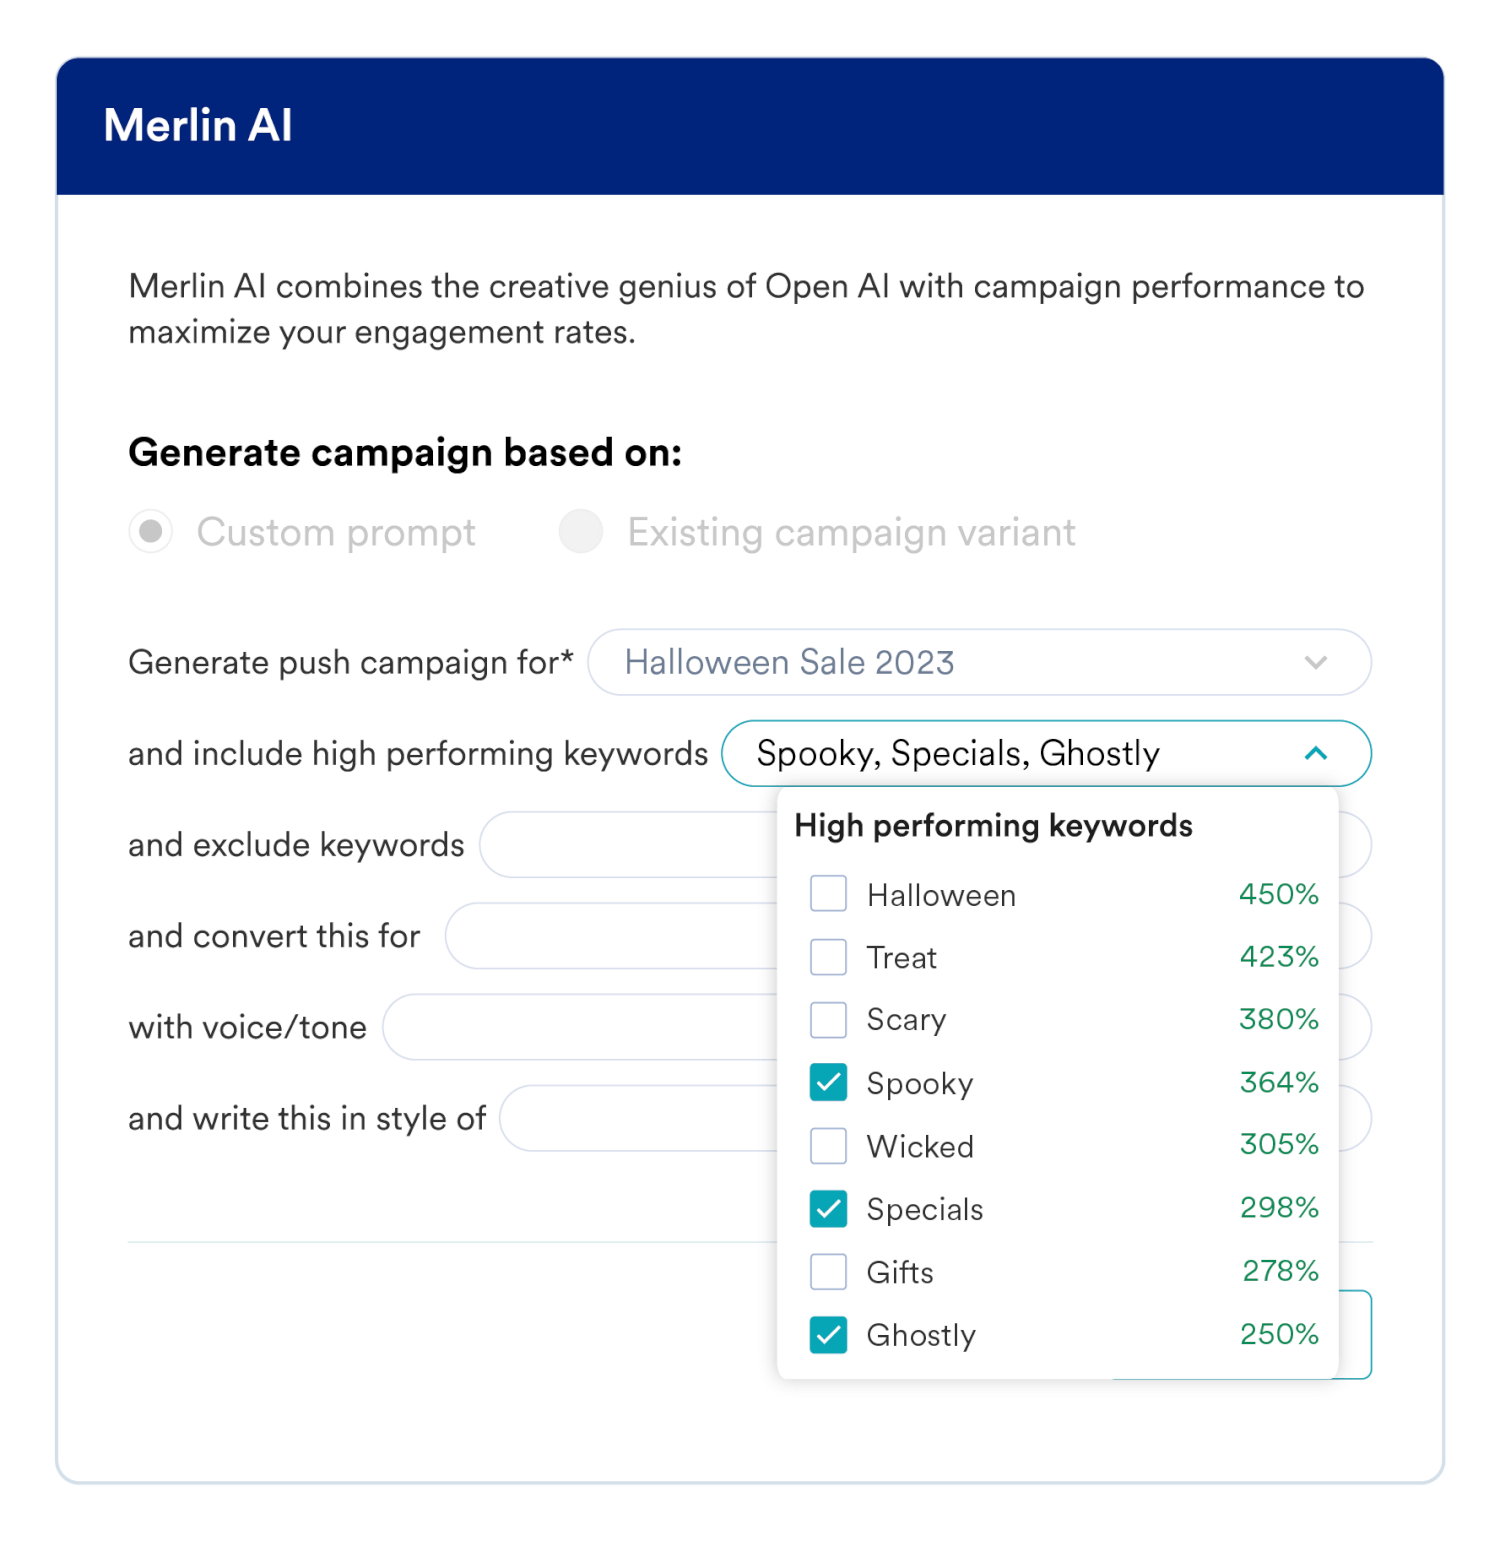 High-performing keywords suggested by Merlin AI